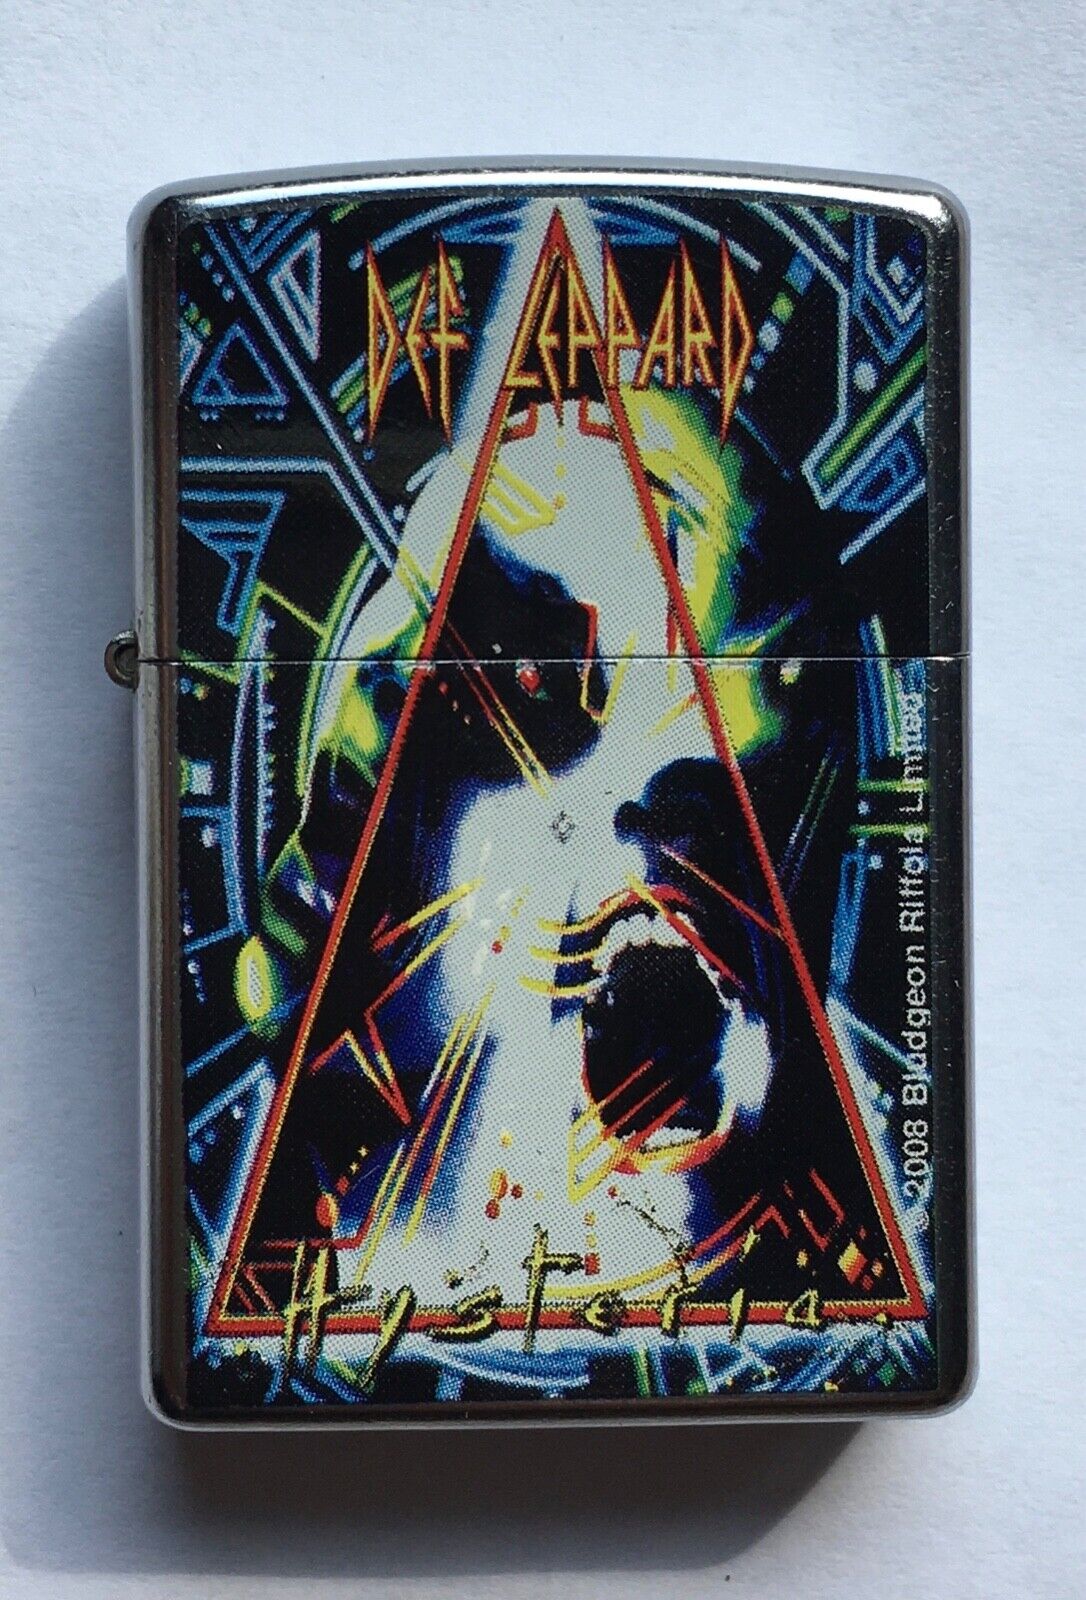 Def Leppard Hysteria Zippo Lighter 2008 Blodgeon Riffola Limited